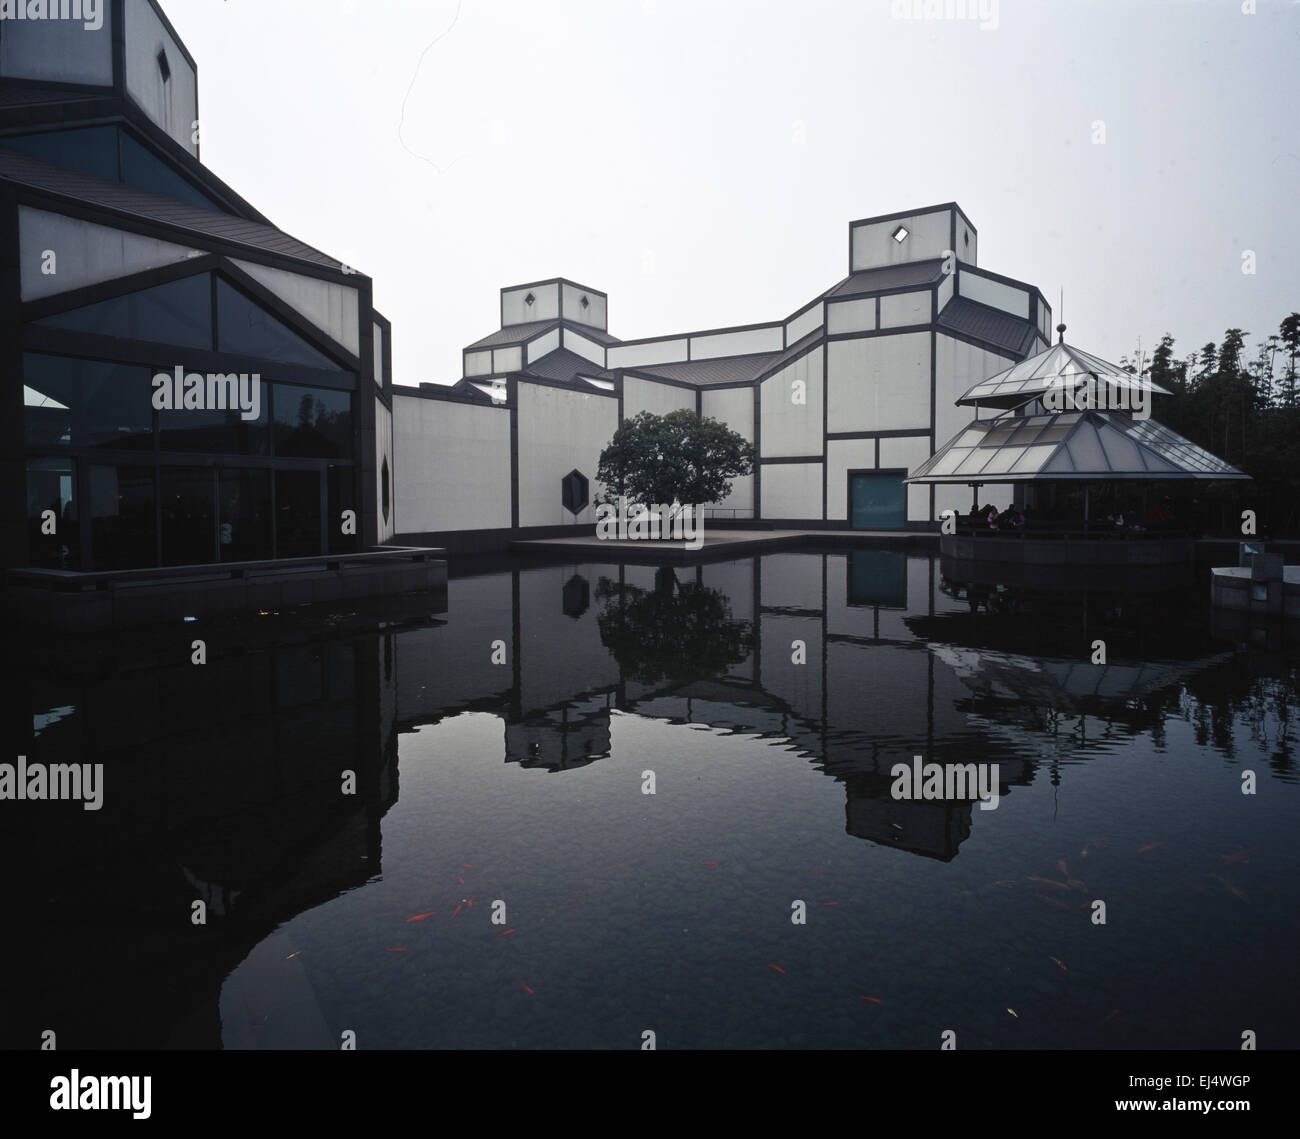 Suzhou Museum designed by architect I.M Pei and completed in 2006 A modern interpretation of building styles Stock Photo